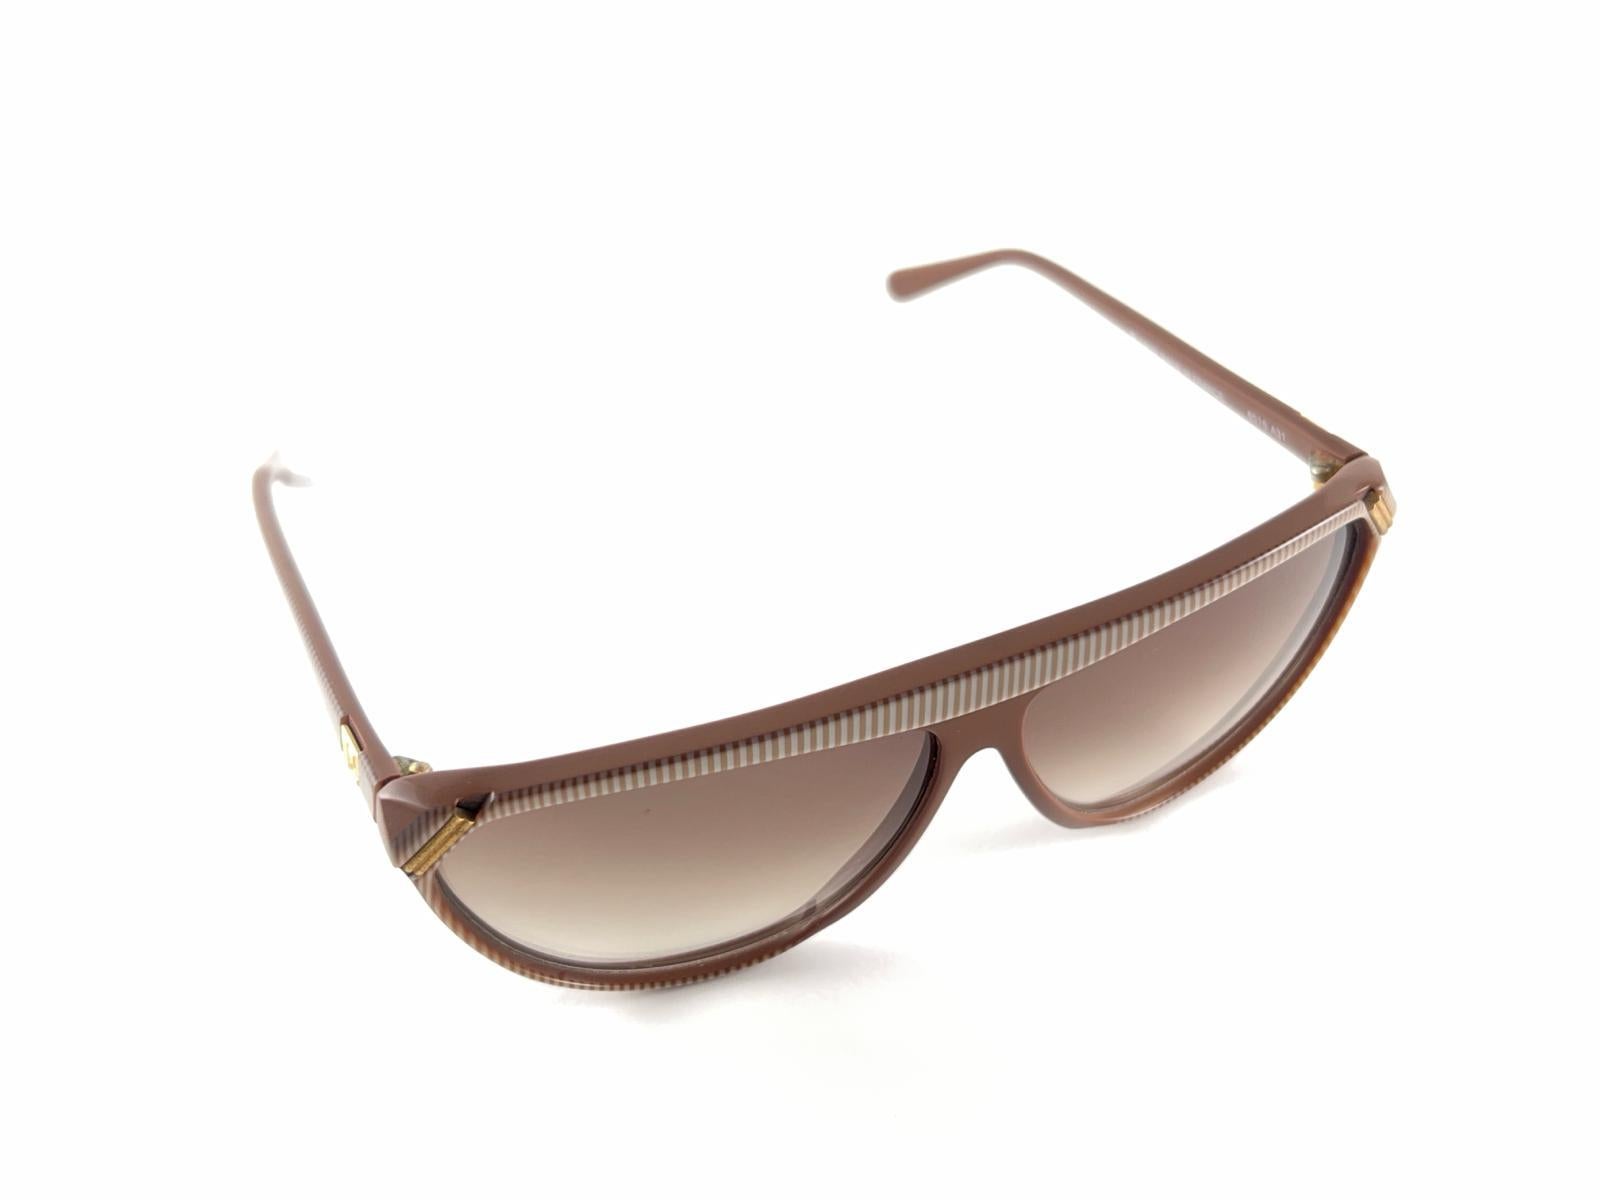 New Vintage Courreges 8516 Moka & Gold Accents Frame Holding A  Pair Of Medium Translucent Brown Lenses Handmade In France 1980’S 
Genius Designer Andre Courreges Signed This Beautiful Pair Of 1980’S Sunglasses
This Item May Show Minor Sign Of Wear